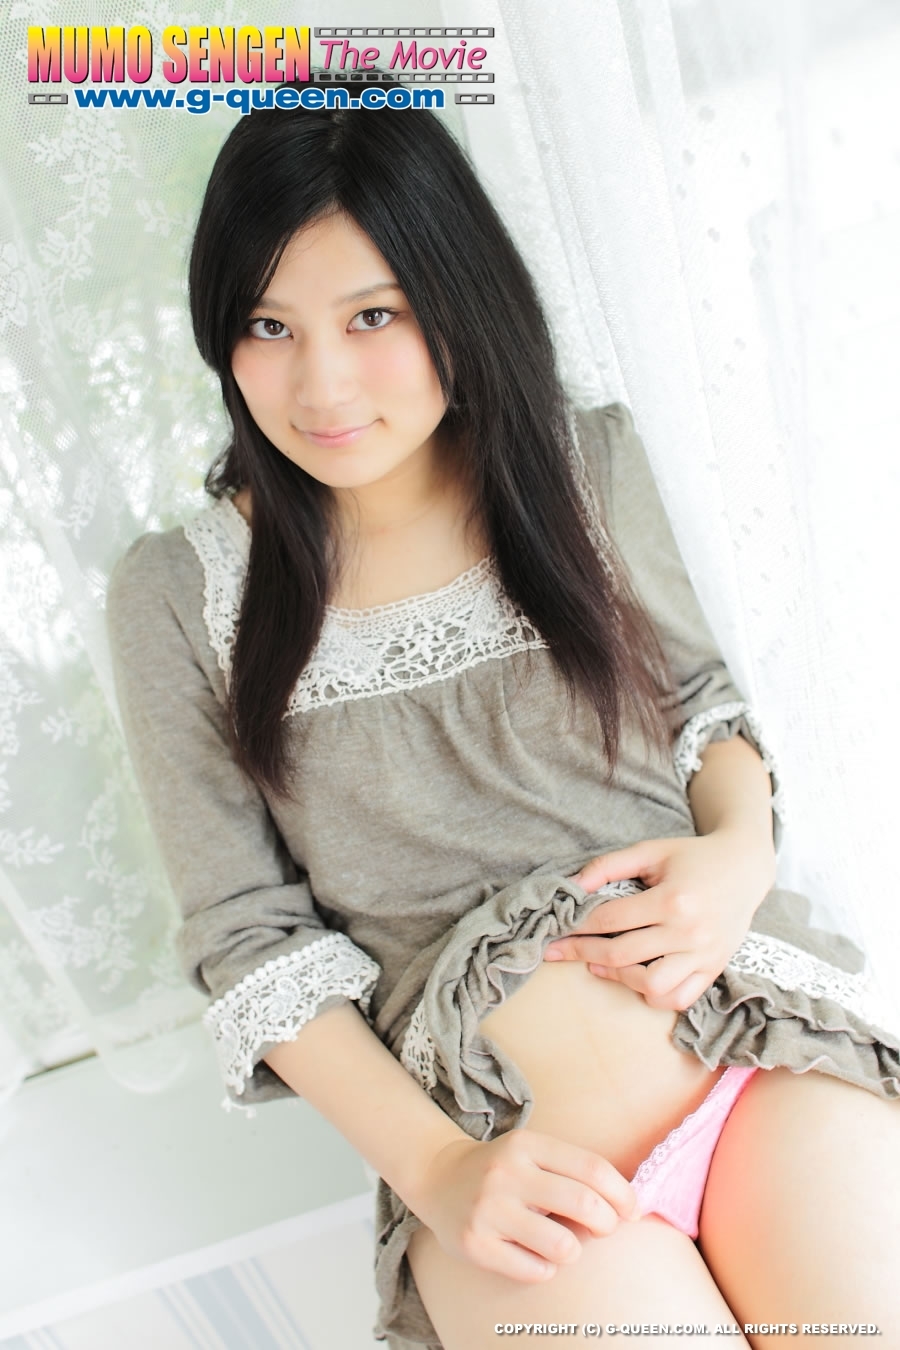 Japanese girl with beautiful eyes takes off her panties - XXXonXXX - Pic 4